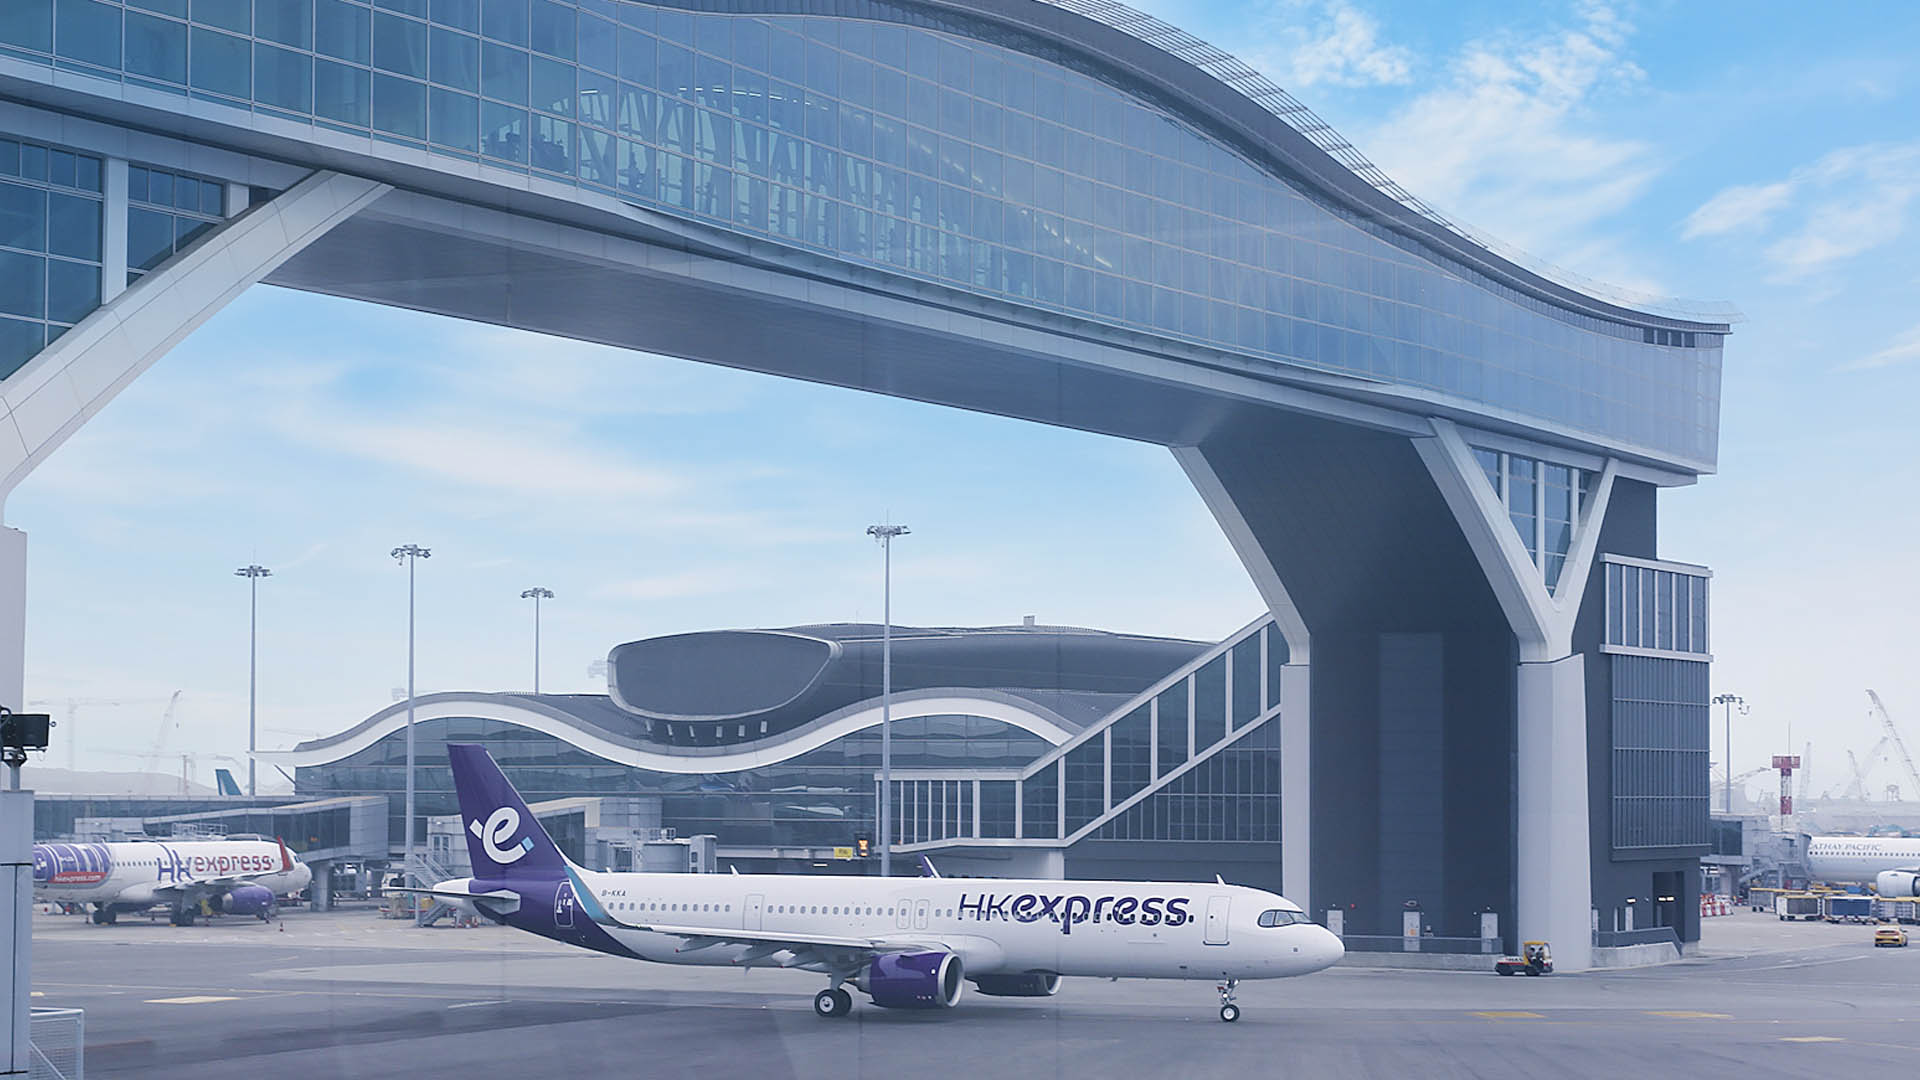 HK Express ranks third globally and first in Asia for on-time performance among low-cost carriers in the "2023 On-time Performance Review Report".